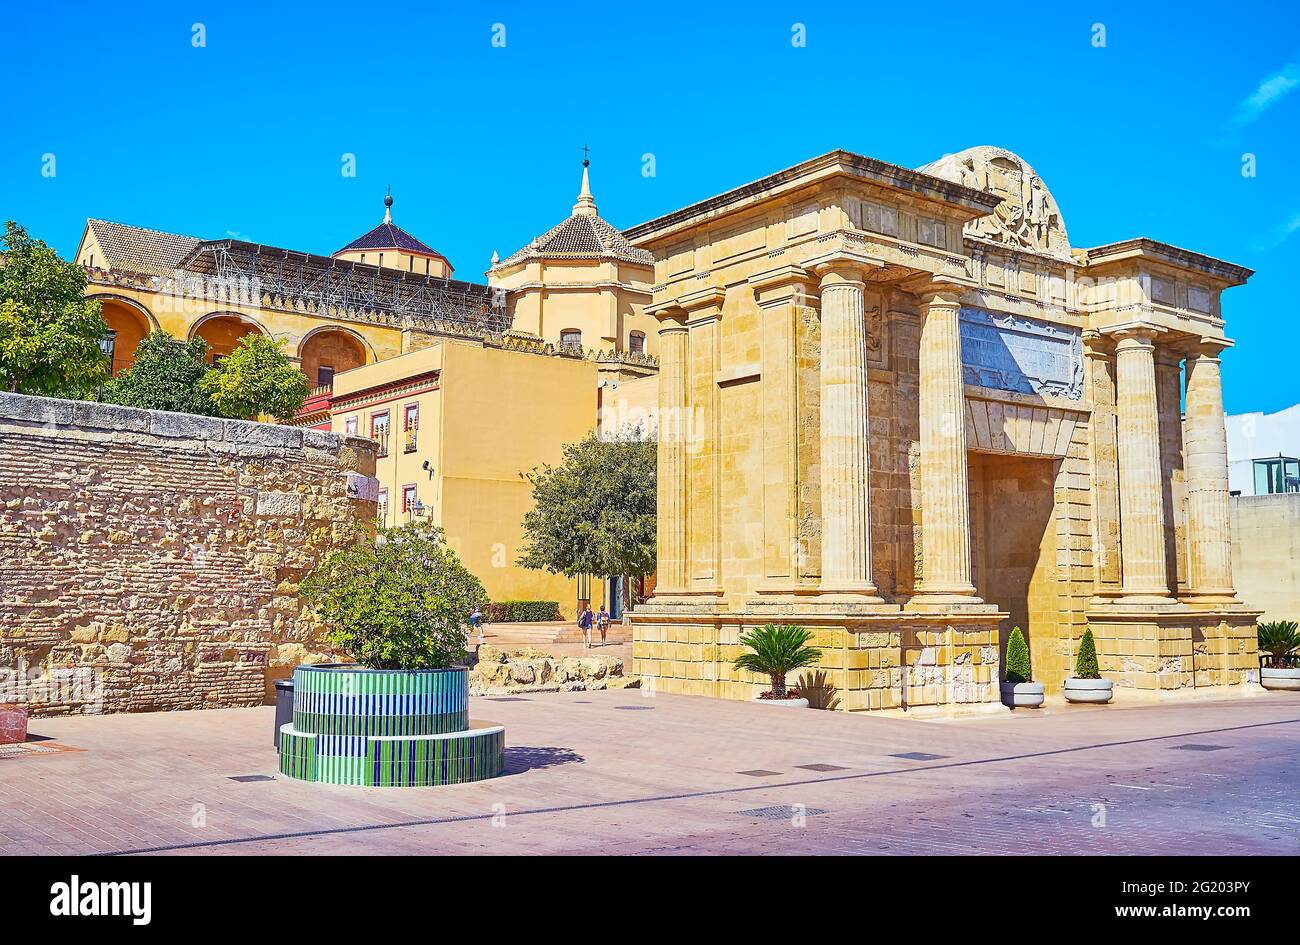 The picturesque facade of Puerta del Puente or the Bridge Gate of Cordoba, decorated with carved patterns, columns and wall sculptures, Spain Stock Photo